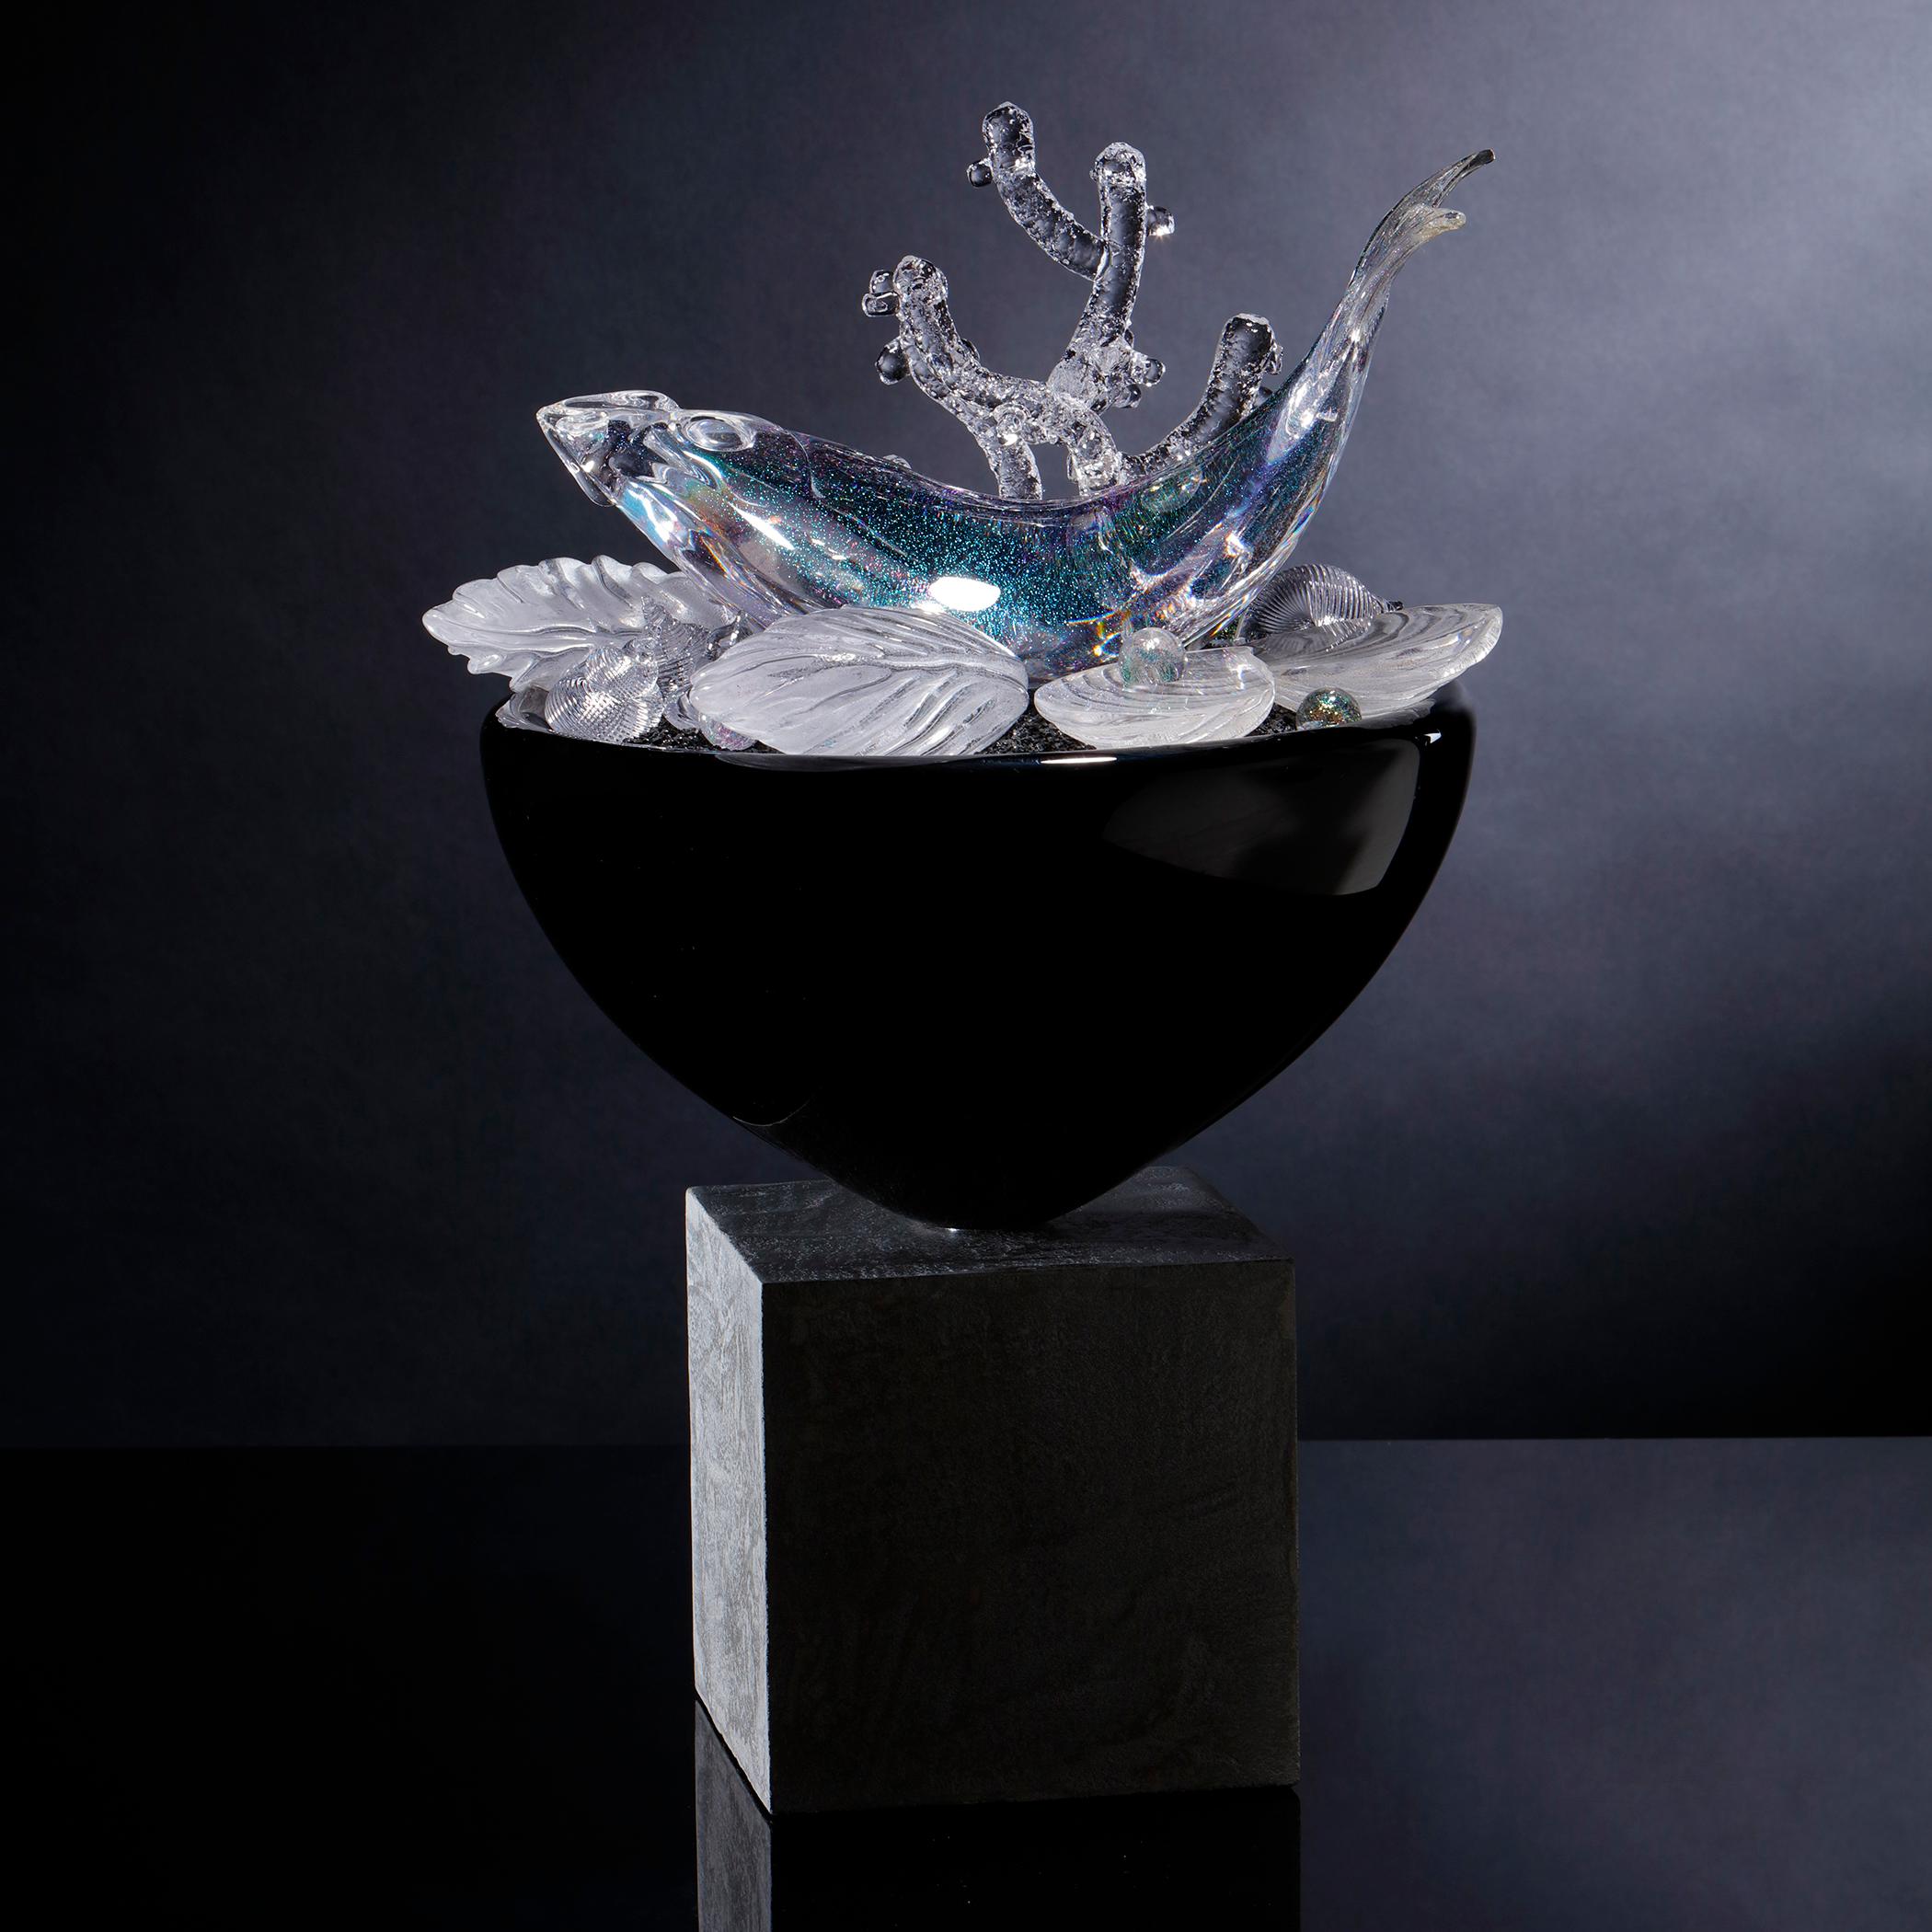 Still Life with Fish & Molluscs is one of the British artist Elliot Walker's ongoing body of unique still life artworks. Freehand sculpted in clear and black glass with iridescent detail, the piece incorporates an elegant black centrepiece adorned